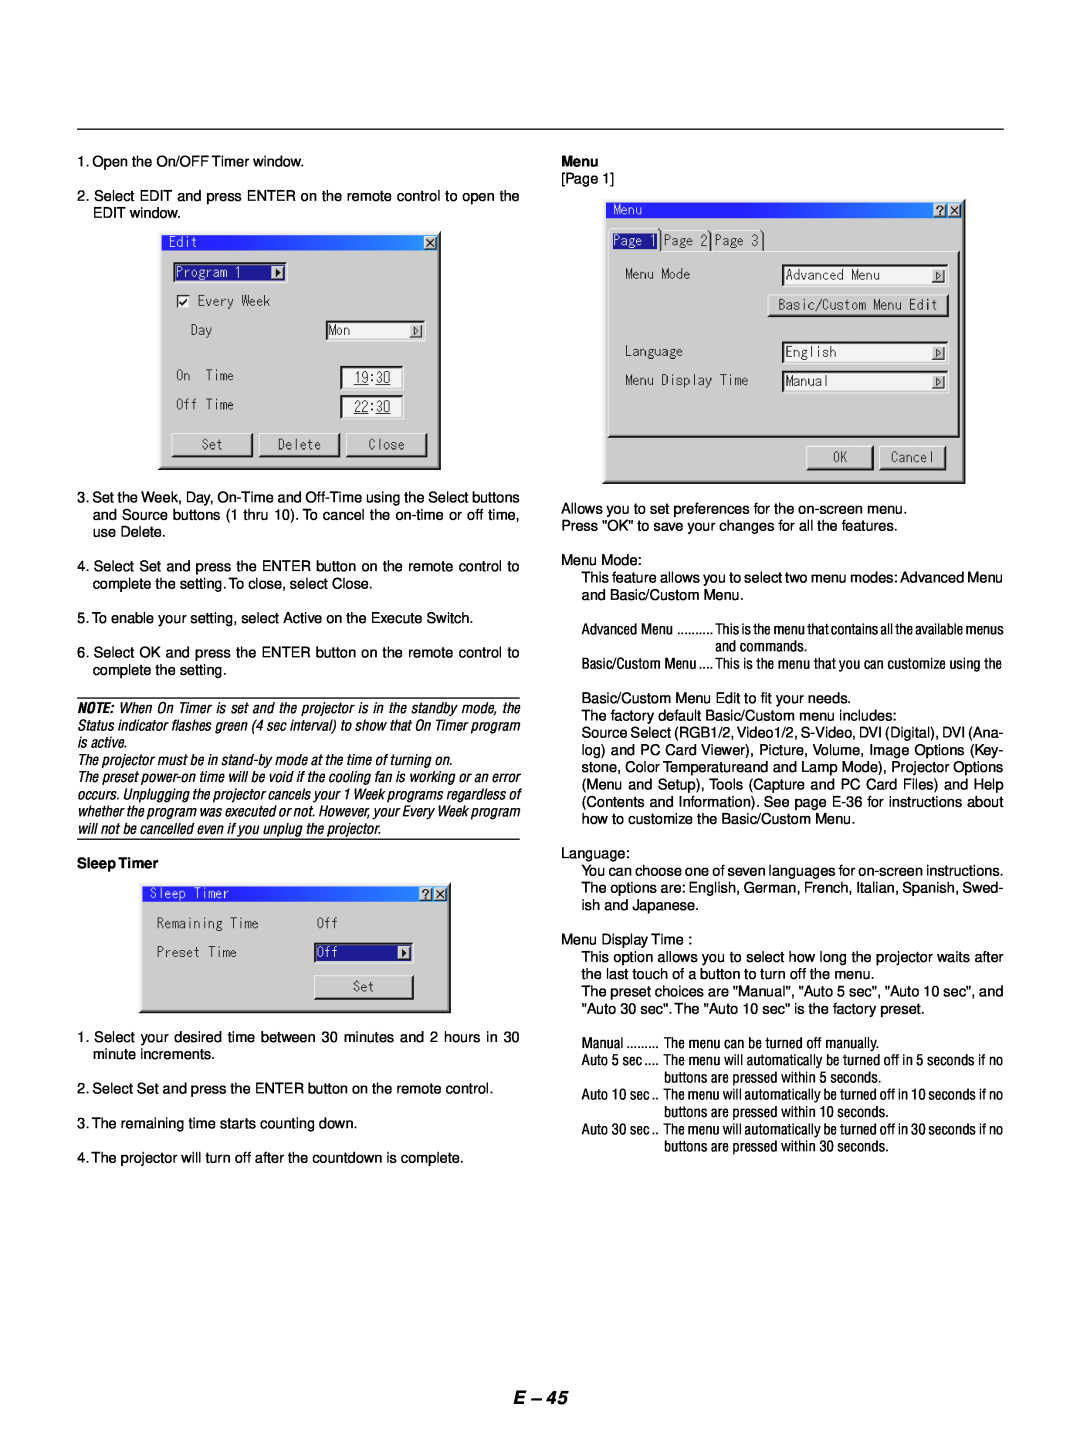 NEC GT1150 user manual The projector must be in stand-by mode at the time of turning on, Sleep Timer, Menu Page 